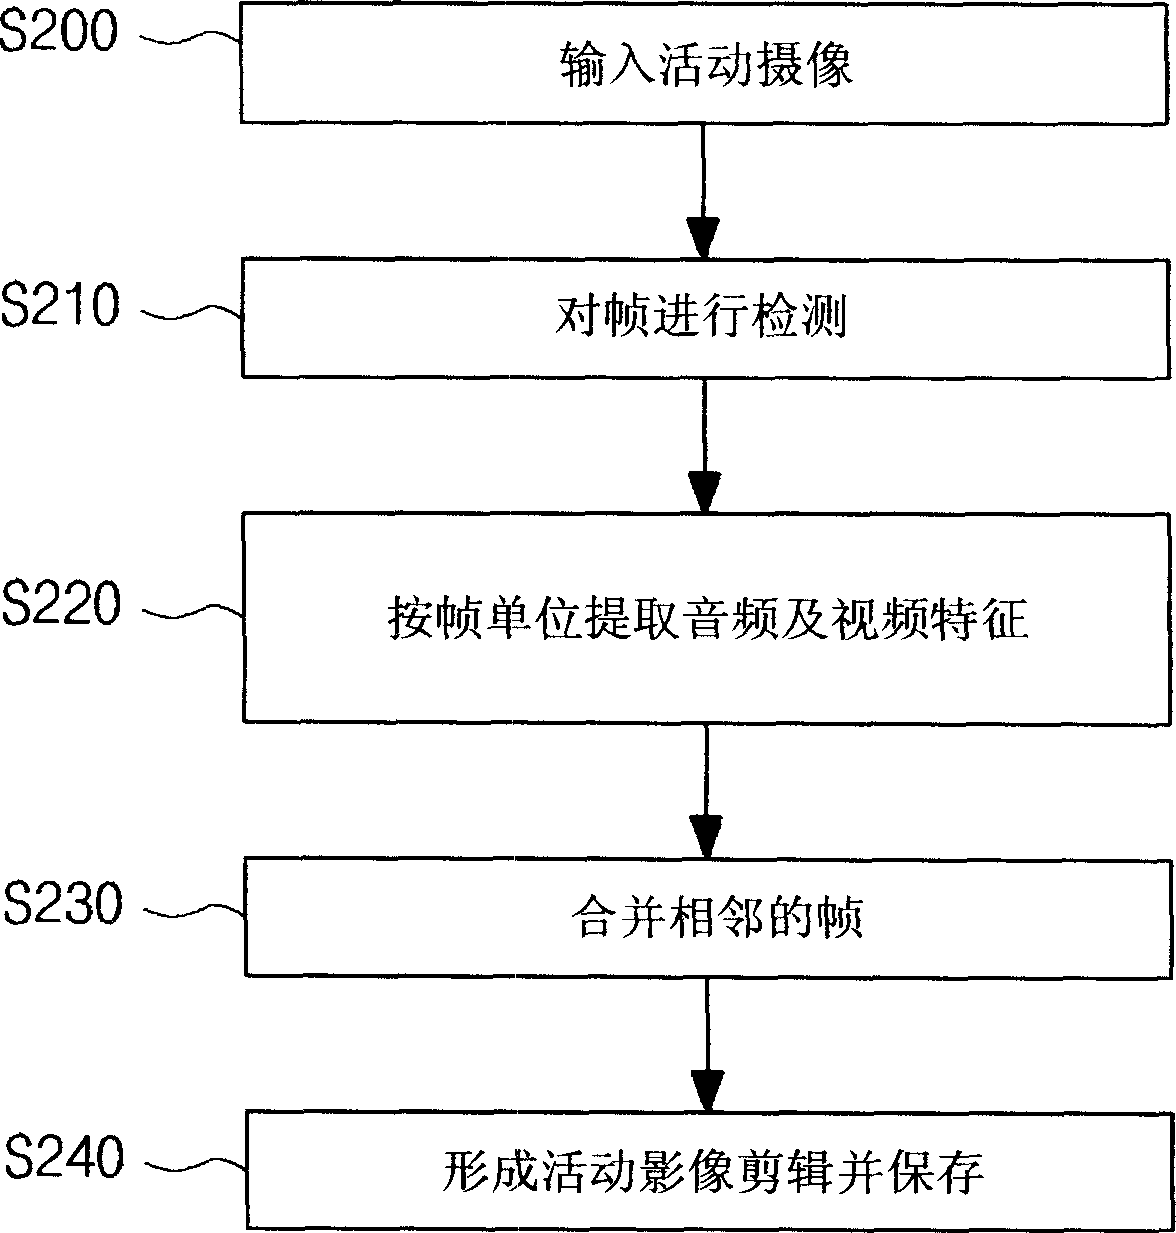 Mobile communication terminal capable of briefly offering activity video and its abstract offering method